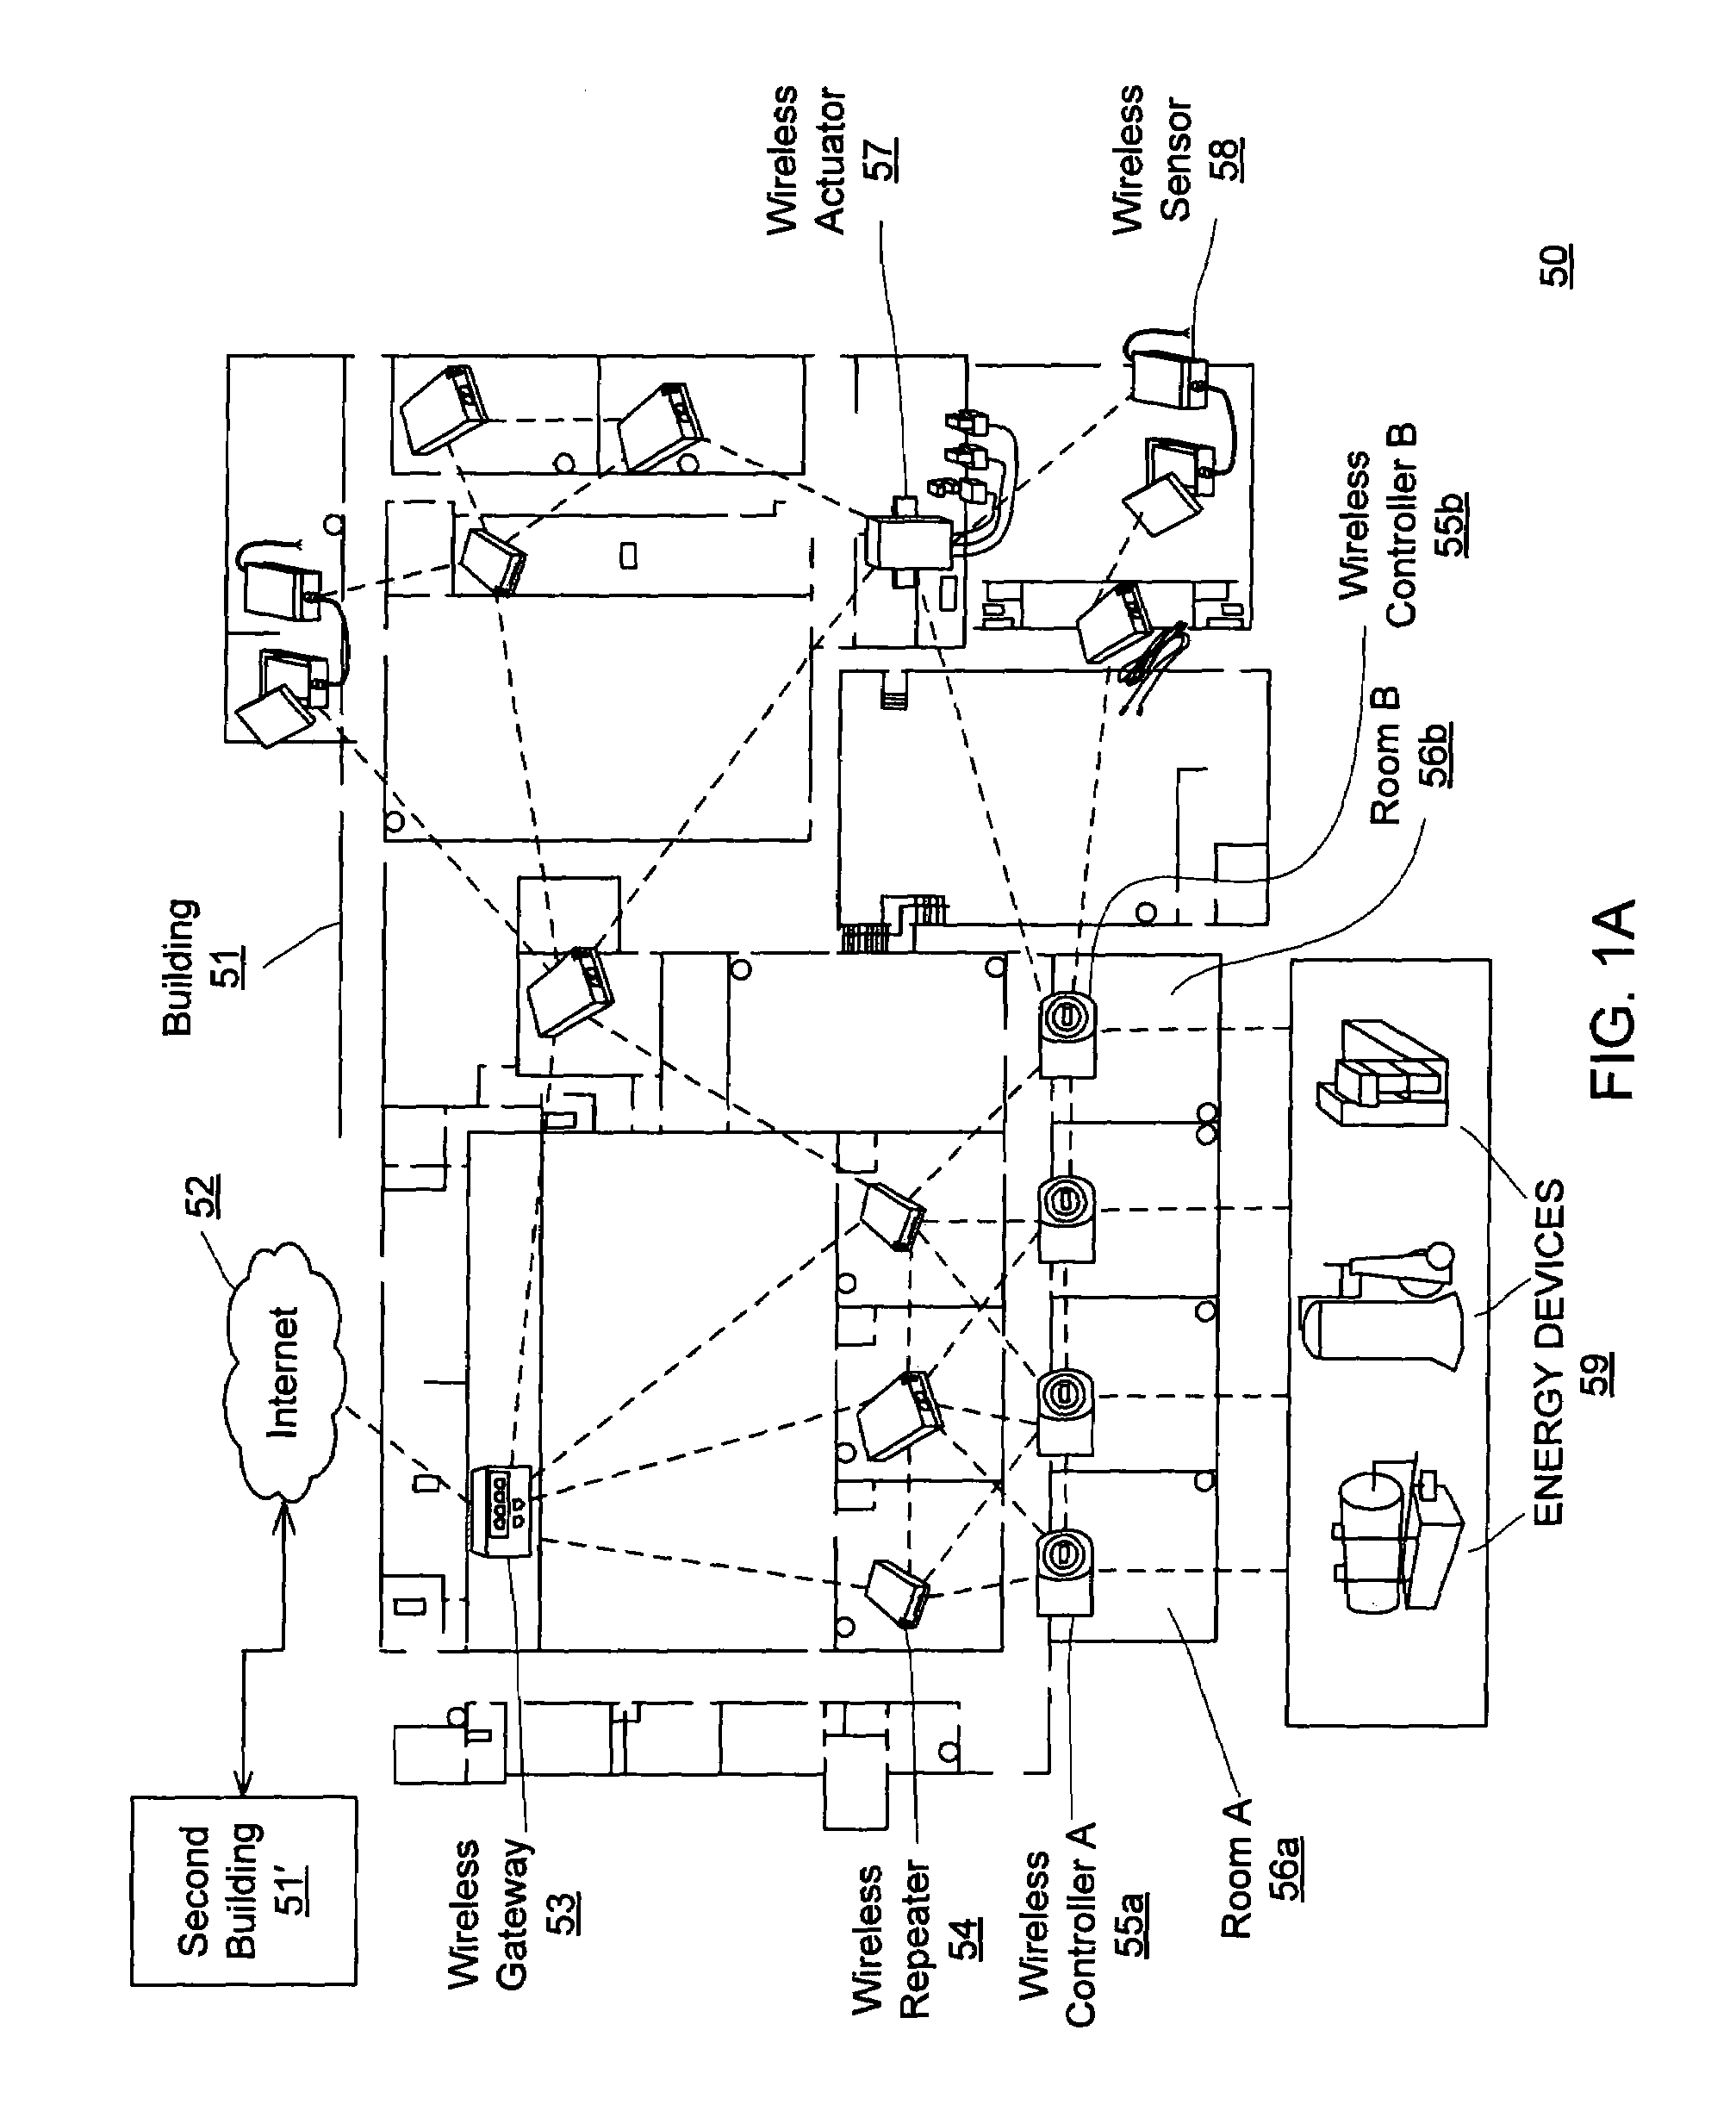 System and method for a wireless controller